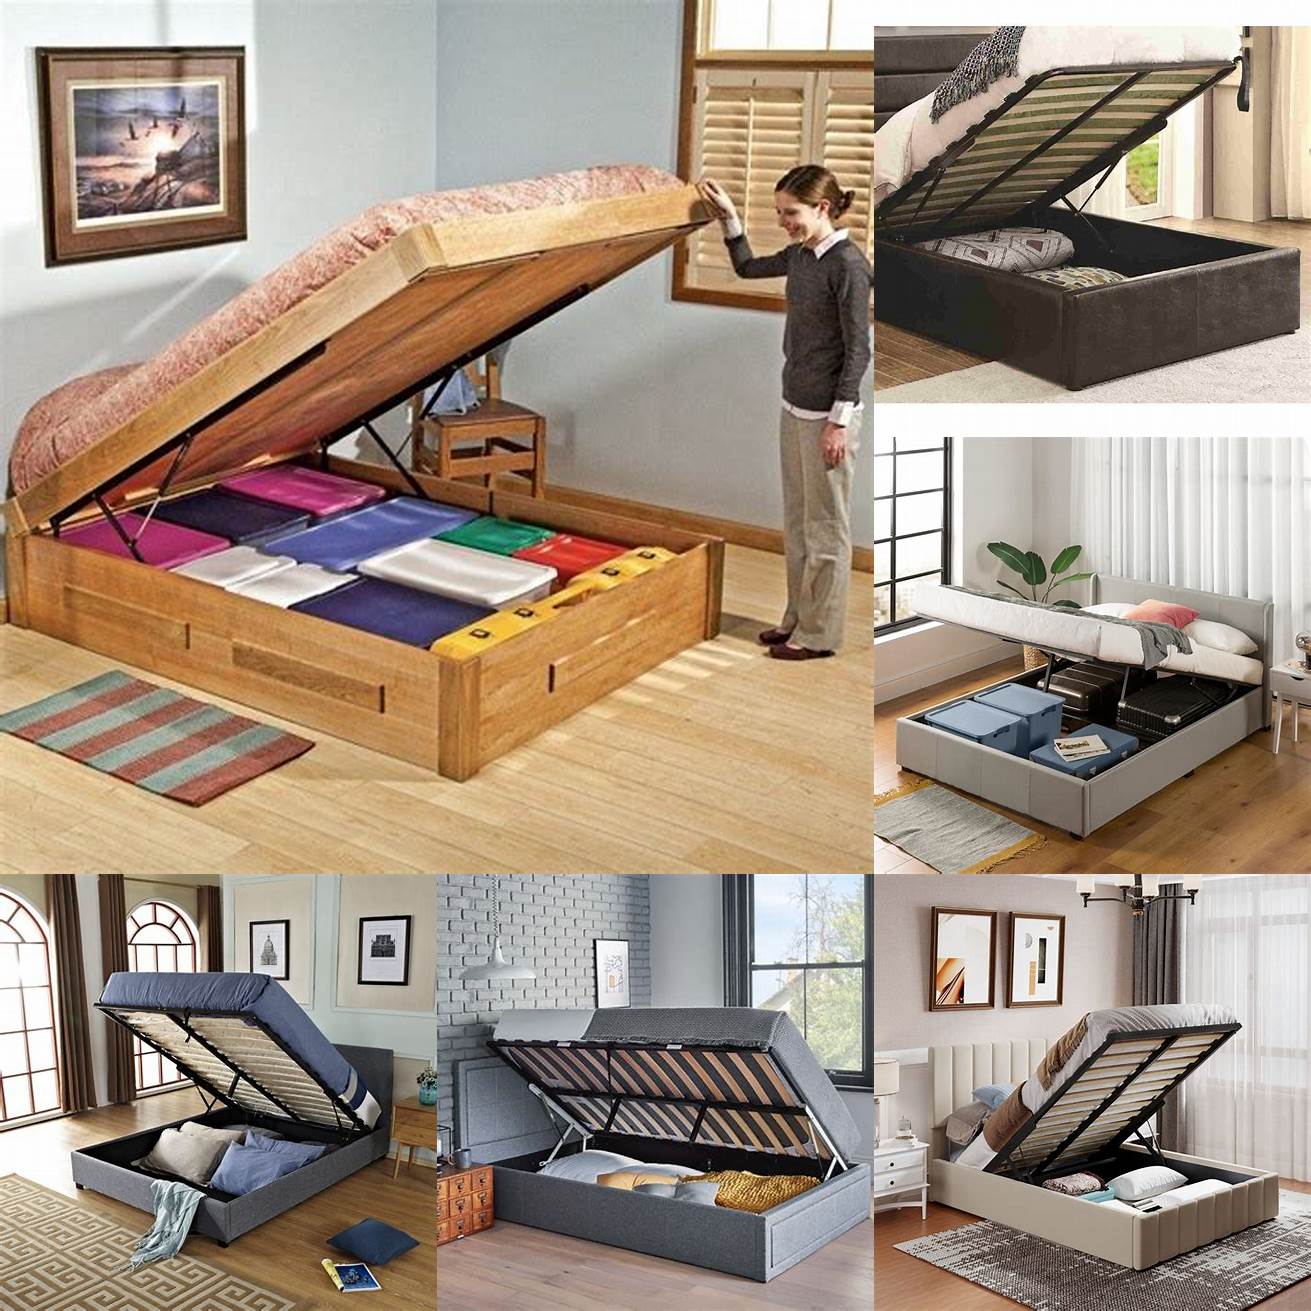 Image of a Storage Bed with Lift-Up Mechanism